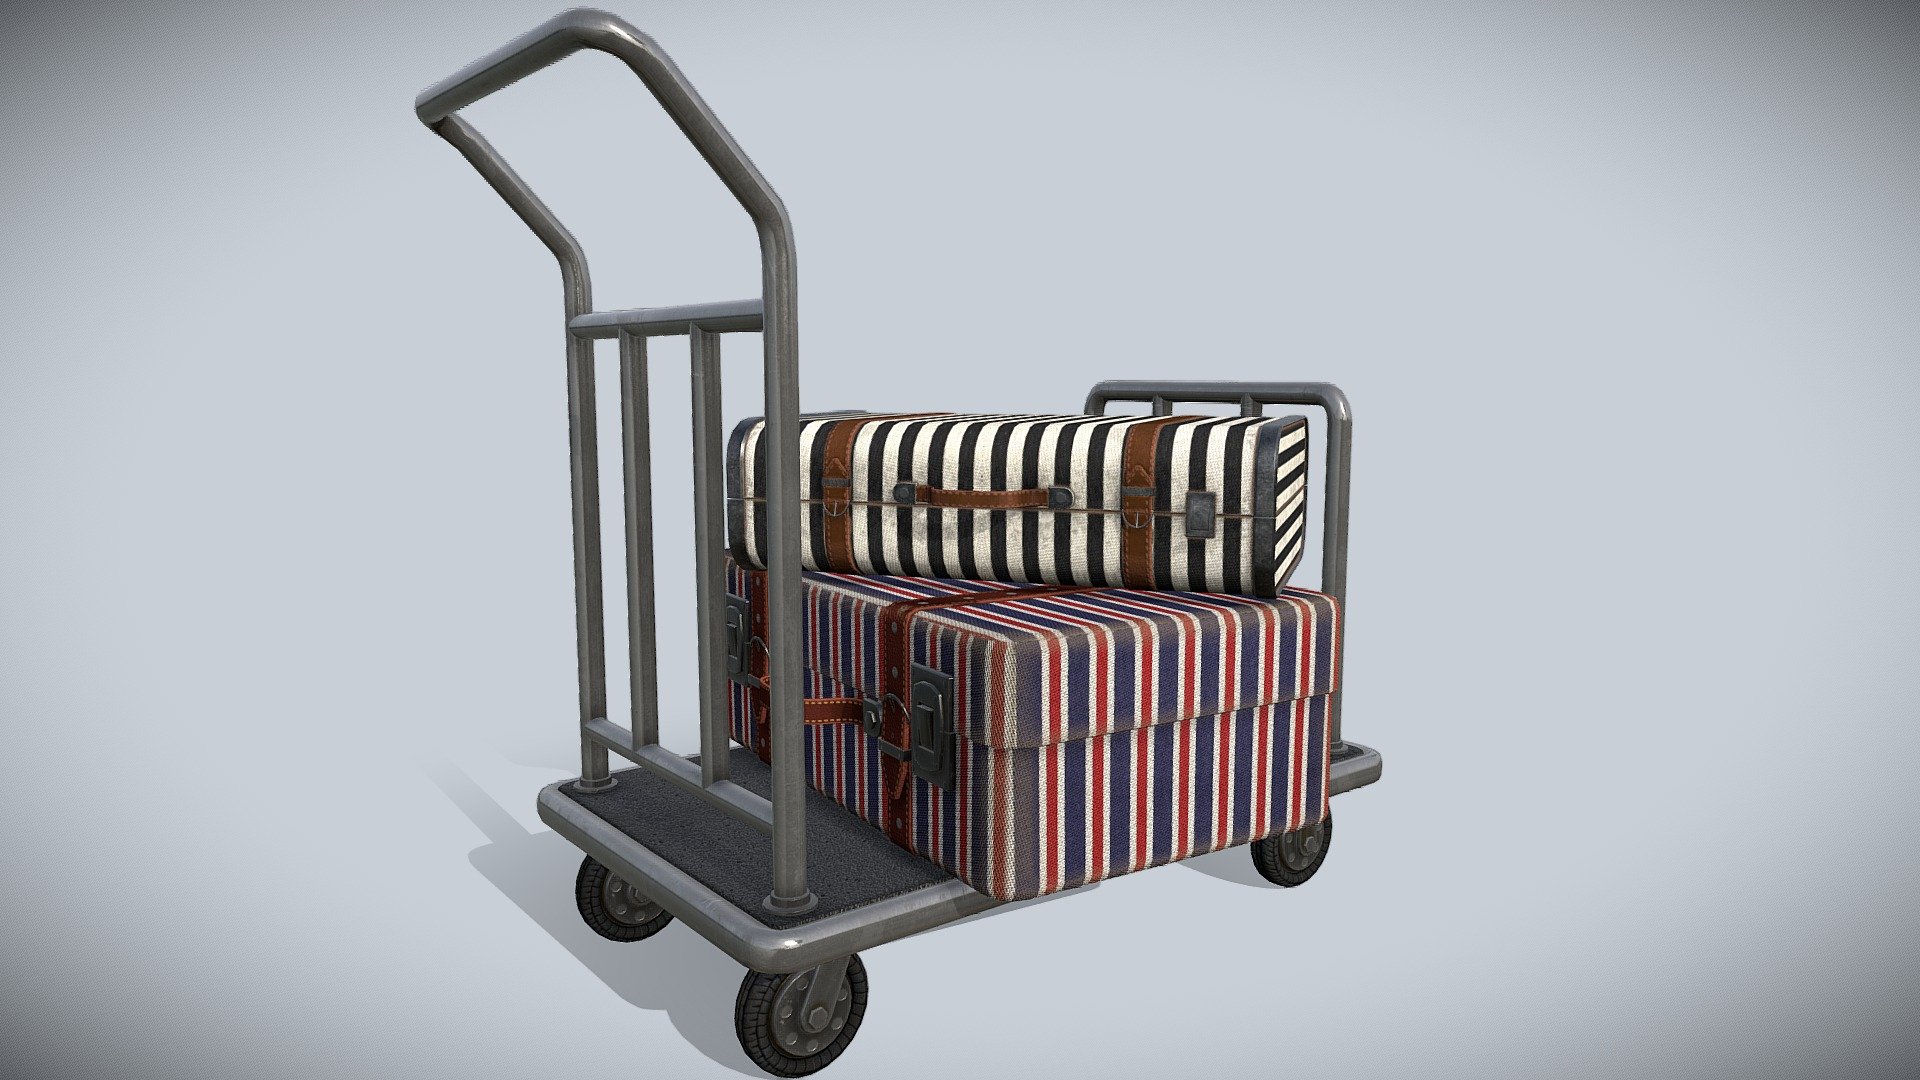 Hotel luggage trolley PBR low-poly game ready
all models are separated
Polygons 6160
Vertices 6302
Textures_2K_4K -JPEG,PNG (Unreal Engine 4)
textures contains threetexture set : 2K_4K (Diffuse,Normal,
Metalness,Roughness,AO)
Archive Textures consist full PBR_JPEG texture set.
Original designed no IP required.
Royalty free this mean you can use this product in any 
commercial and noncommercial purpose but you can't resale
this asset as is 3d model